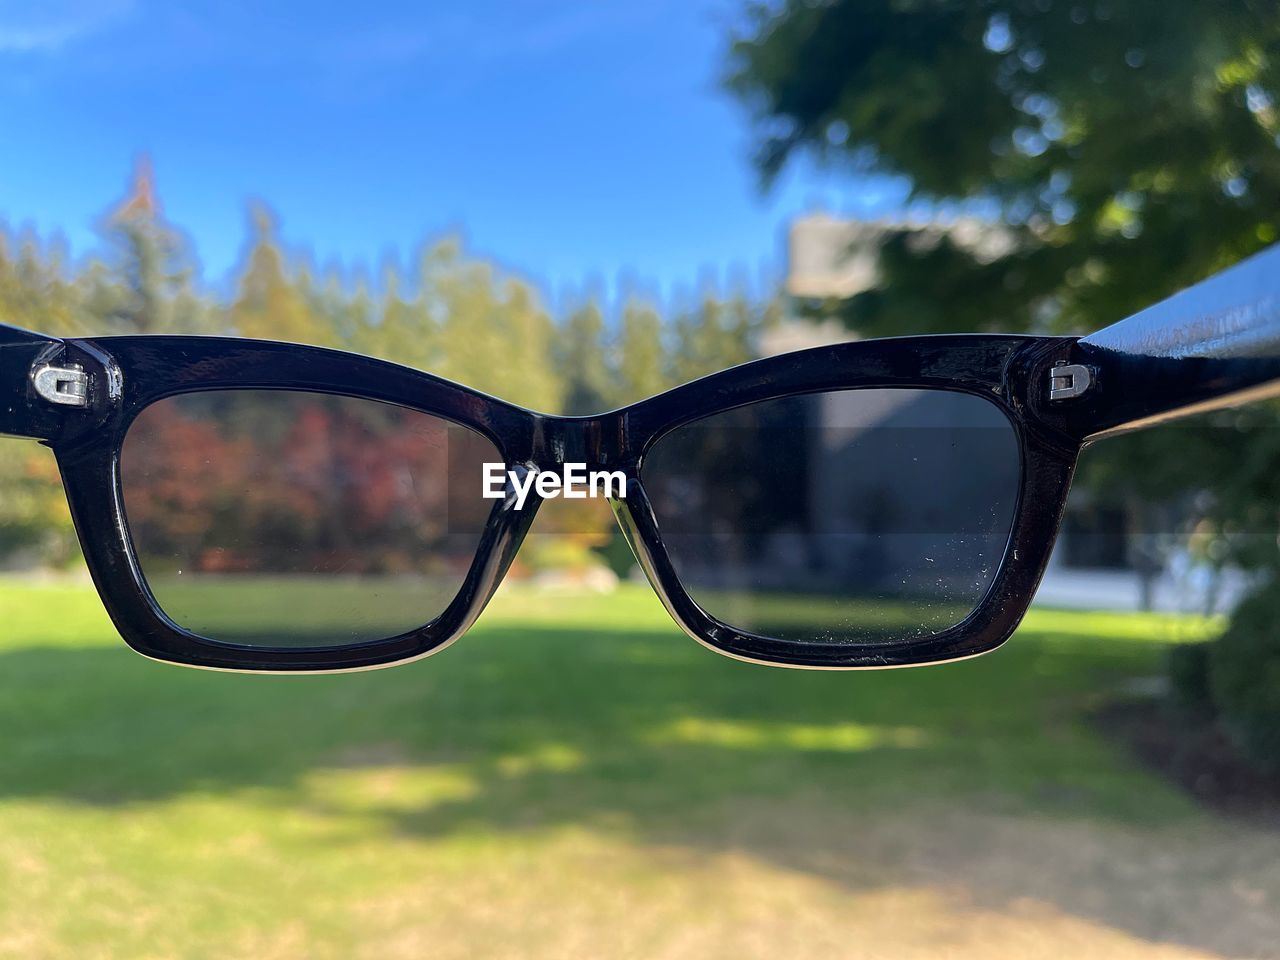 eyewear, glasses, fashion, vision care, sunglasses, reflection, nature, fashion accessory, close-up, outdoors, no people, single object, summer, land, focus on foreground, day, protection, personal protective equipment, cool attitude, sky, security